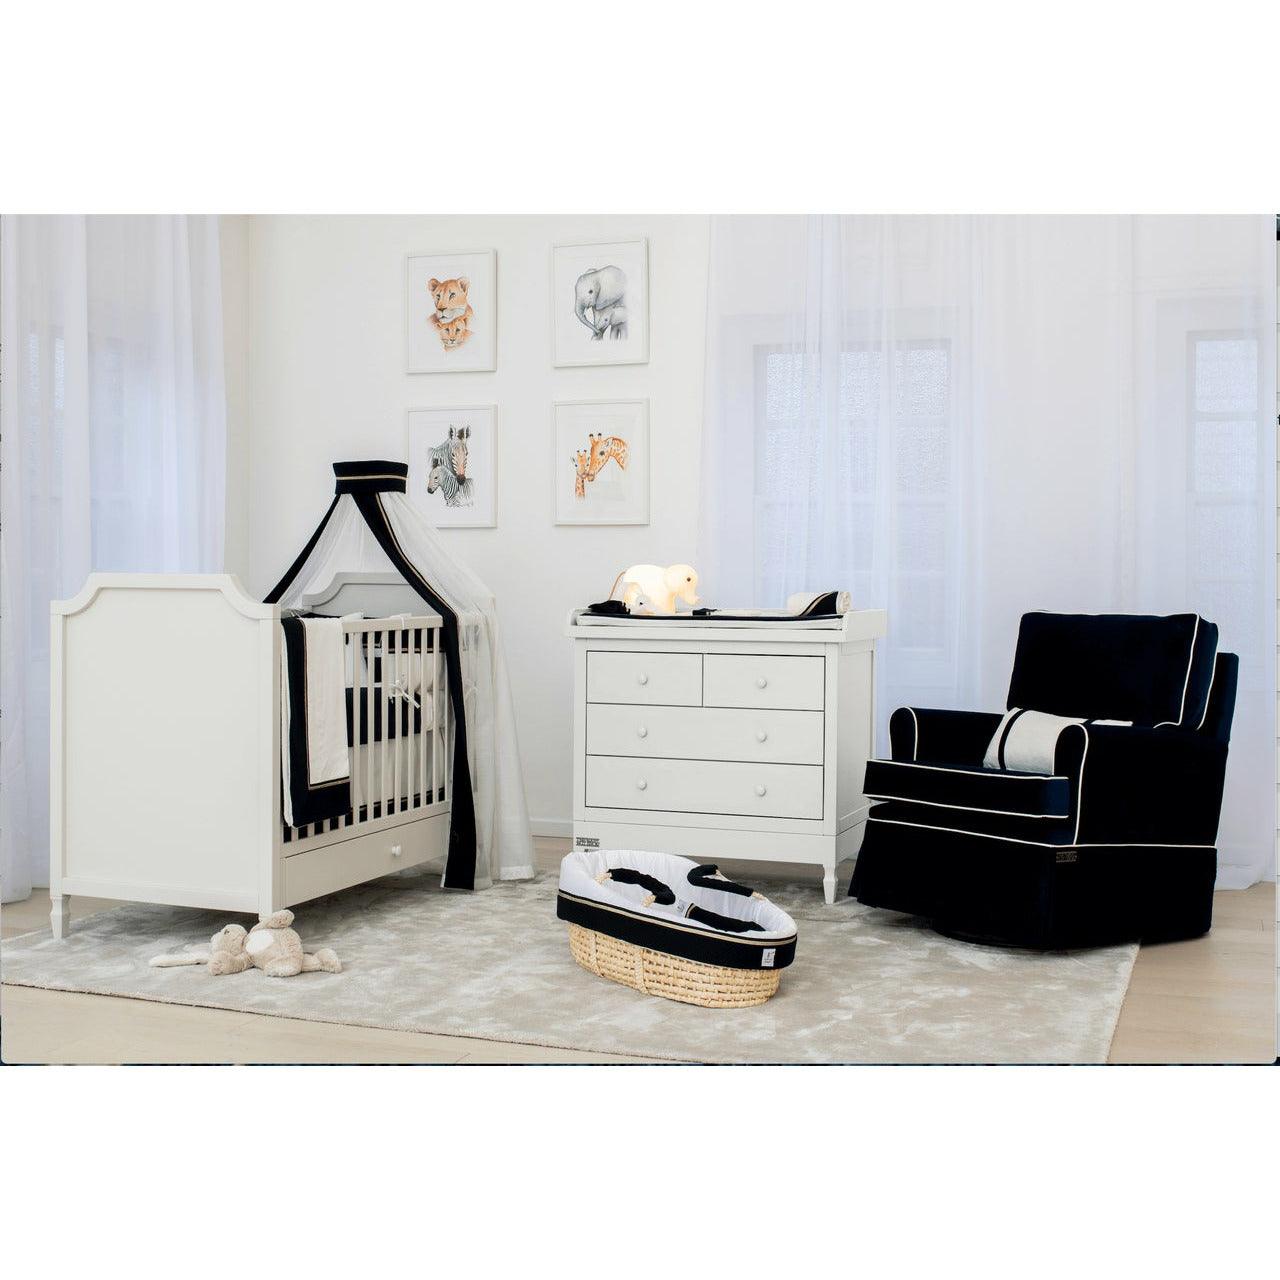 Athens Luxury Nursery Room Collection